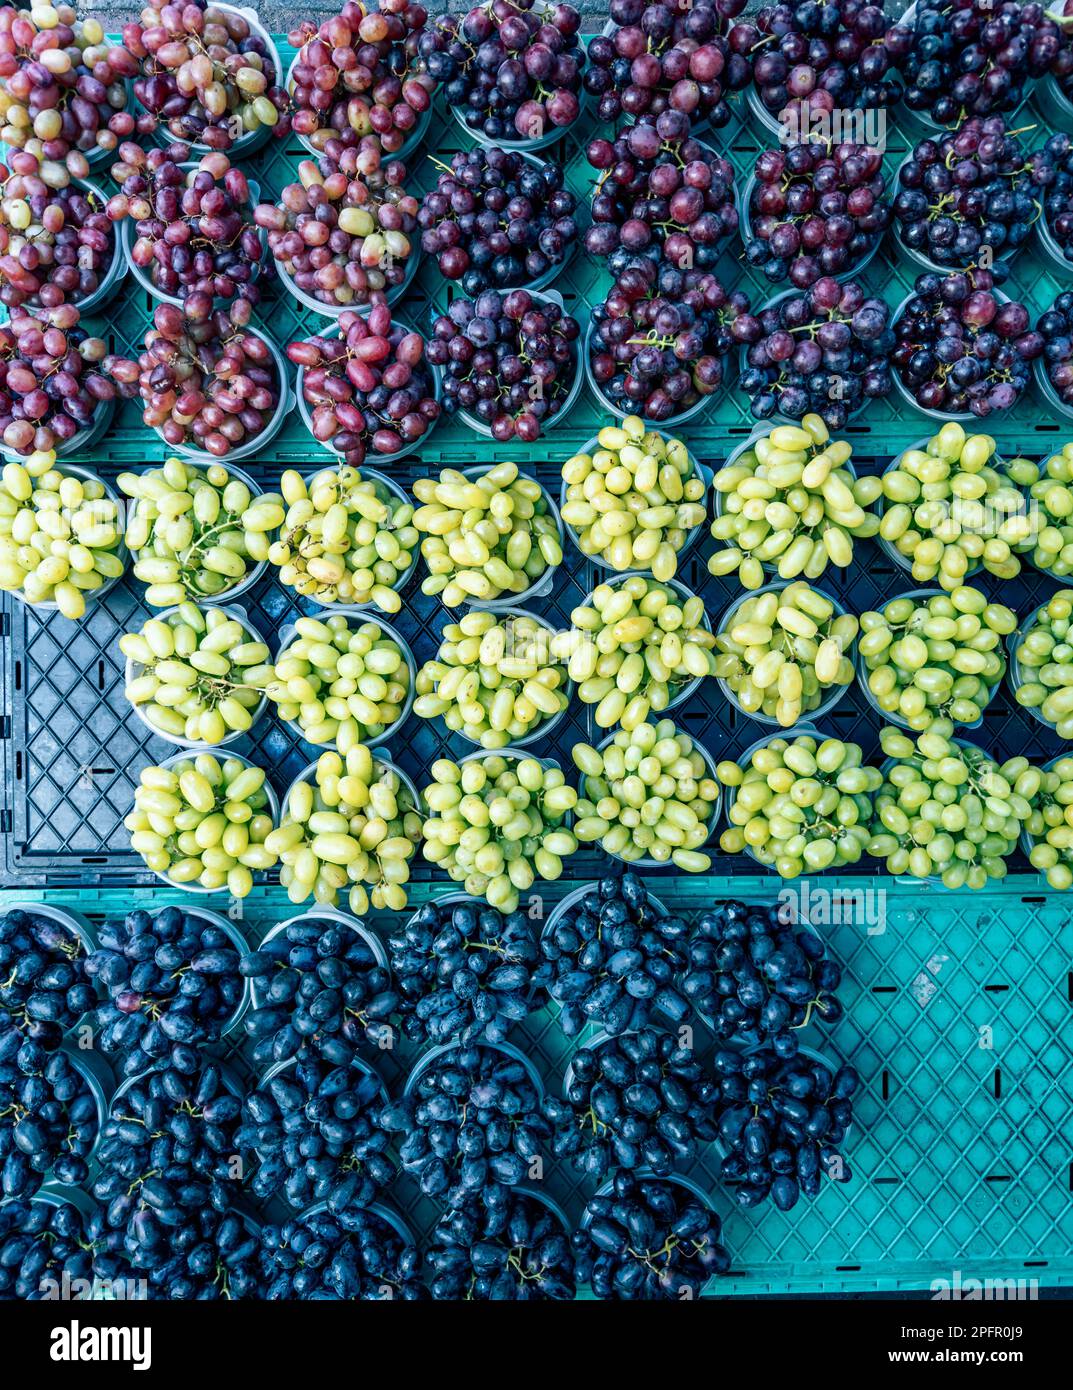 Tubs of red, white and black grapes sold on the streets of Cape Town Stock Photo